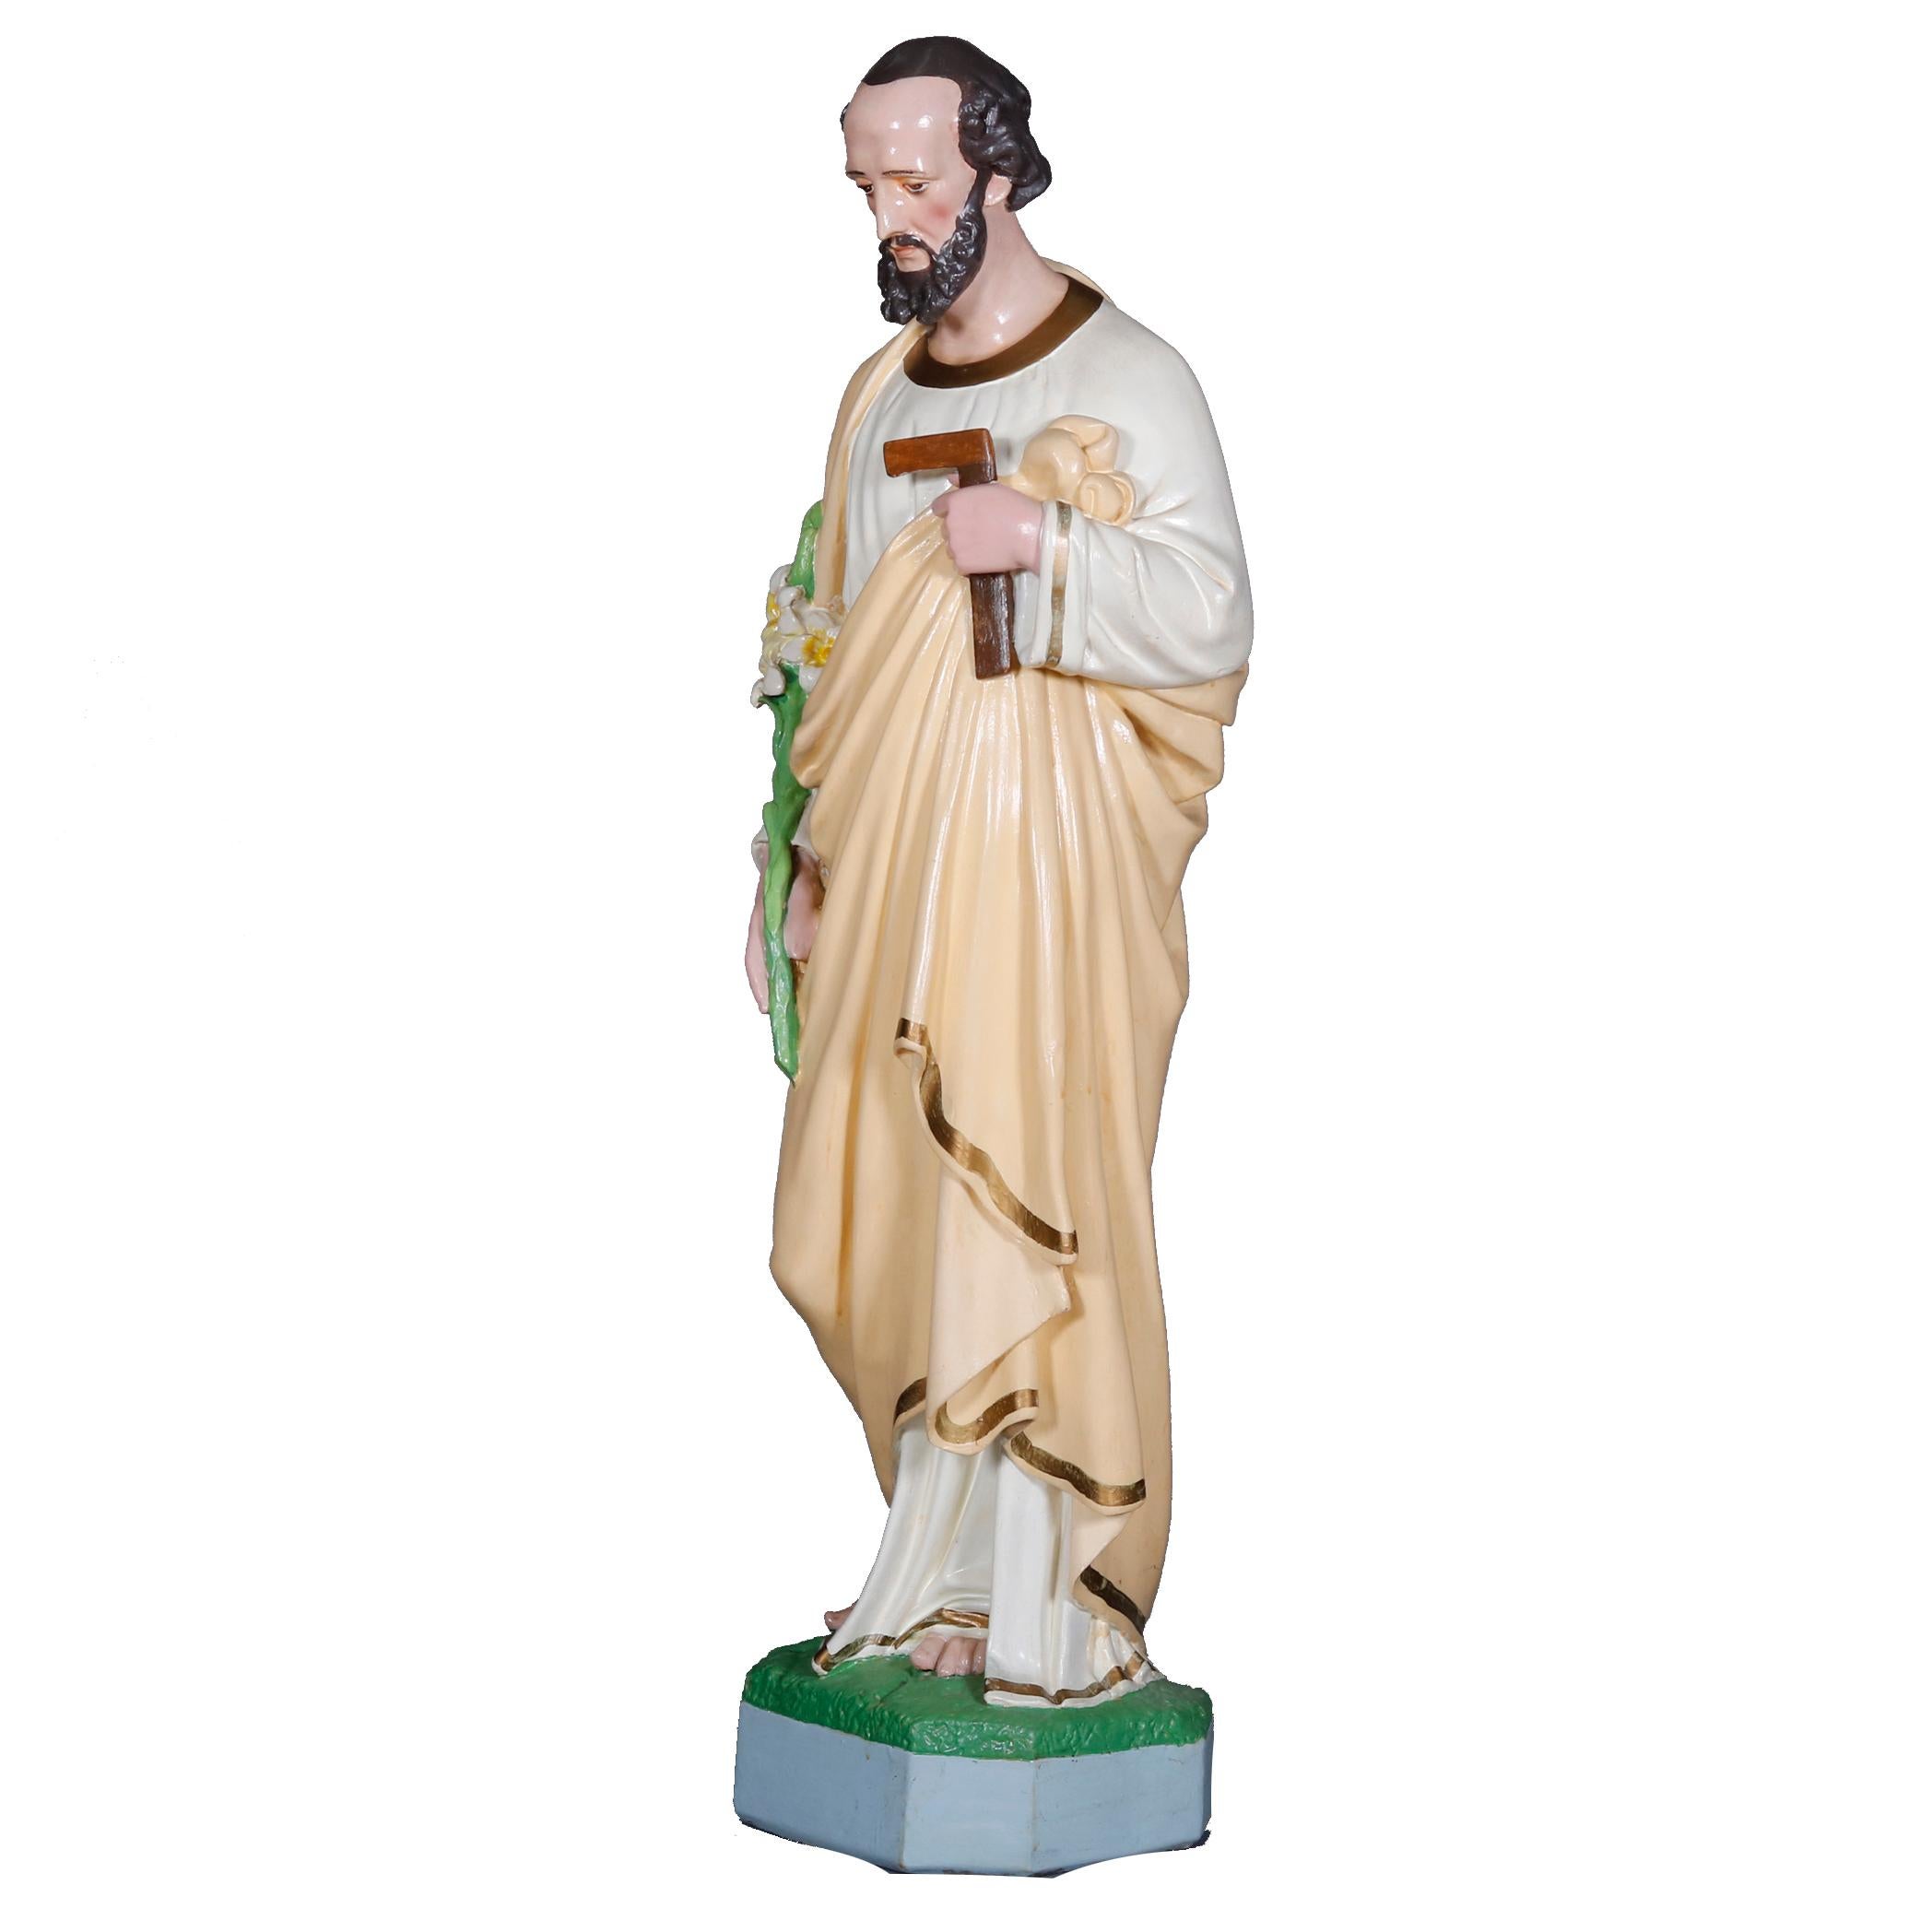 An antique and large full figure Spanish or Italian hollow cast plaster sculptural statue offers hand painted and gilt Christian figure of Saint Joseph with daffodils and carpentry square, Patron Saint of Fathers, circa 1930

Measures: 48.5